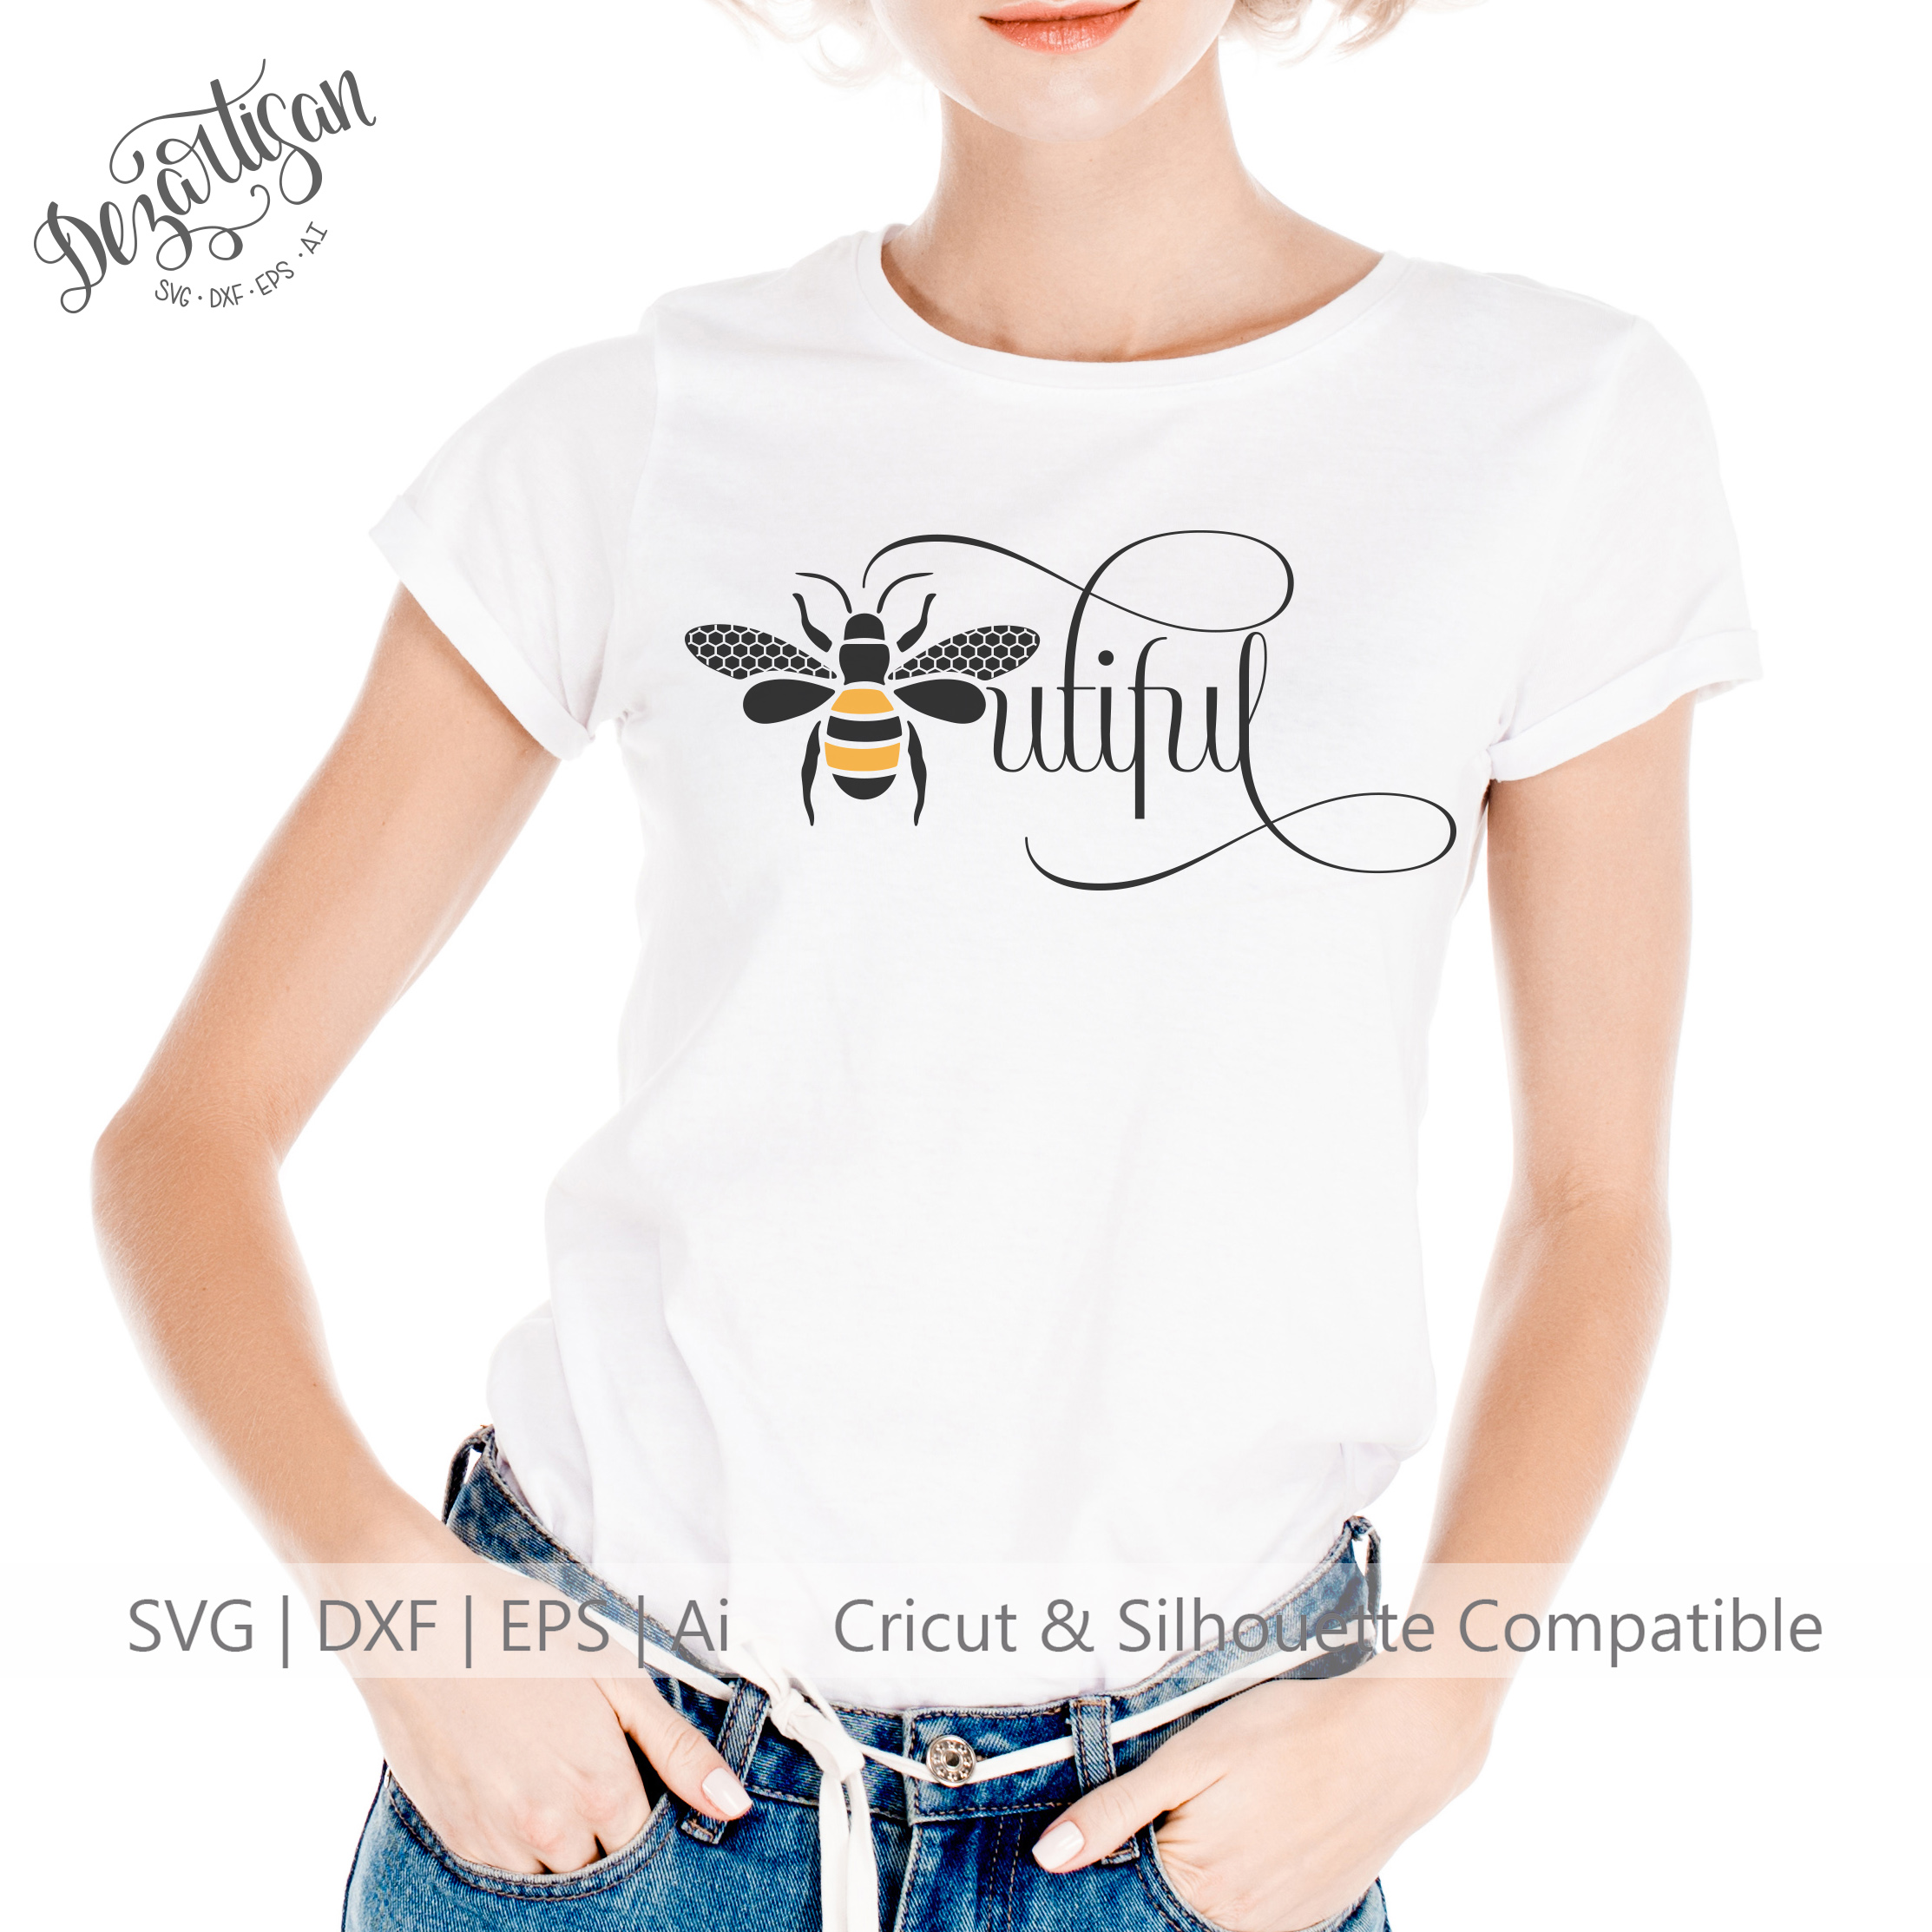 Download Bee Bumble | Beeutiful | Be Different | Bee Bundle SVG | DXF